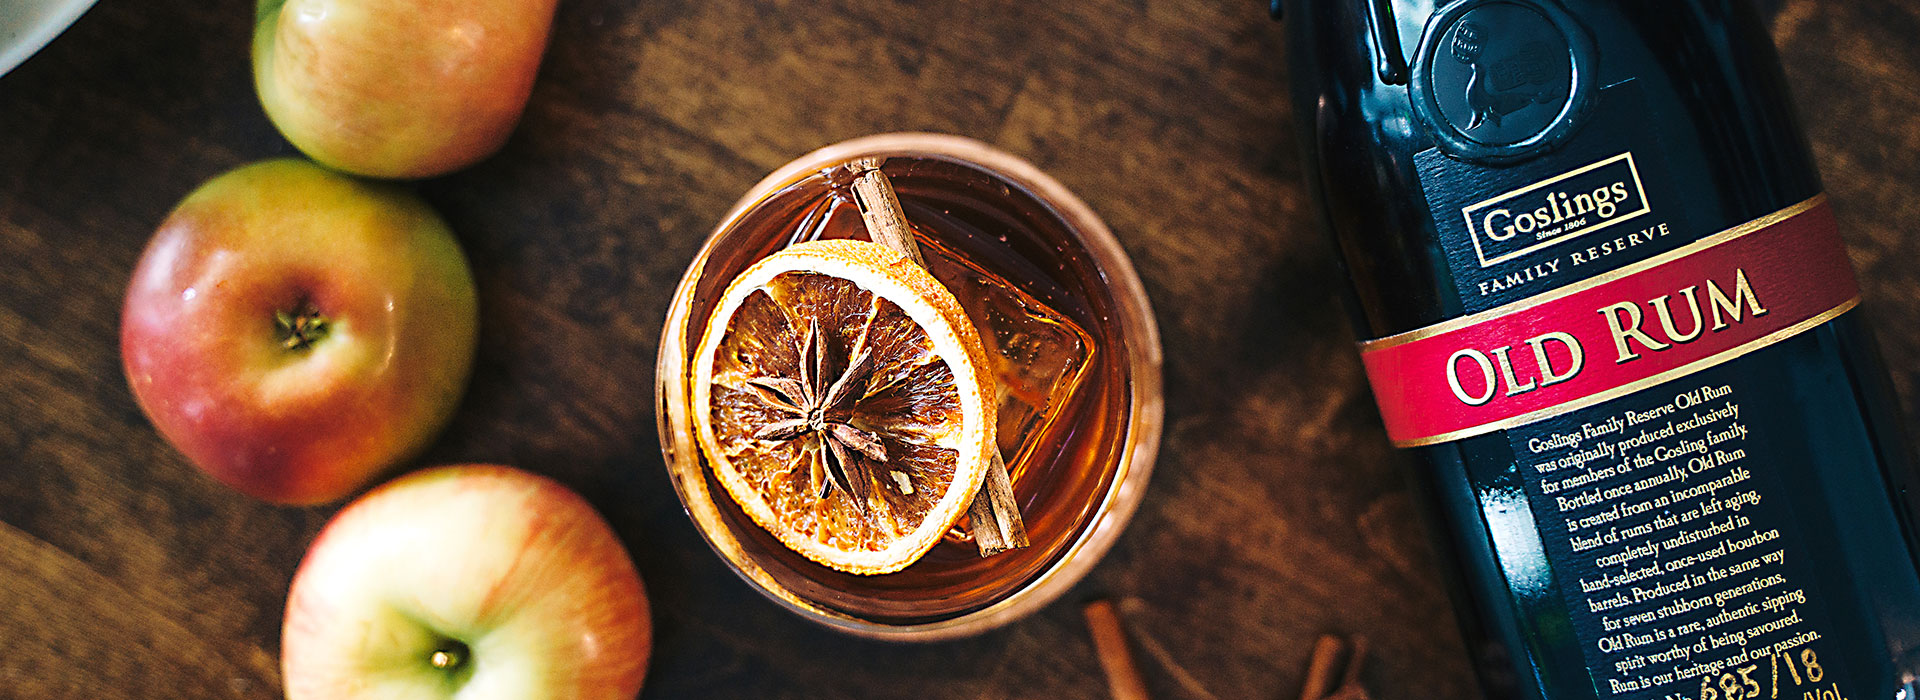 Goslings Wintry Spiced Old Fashioned